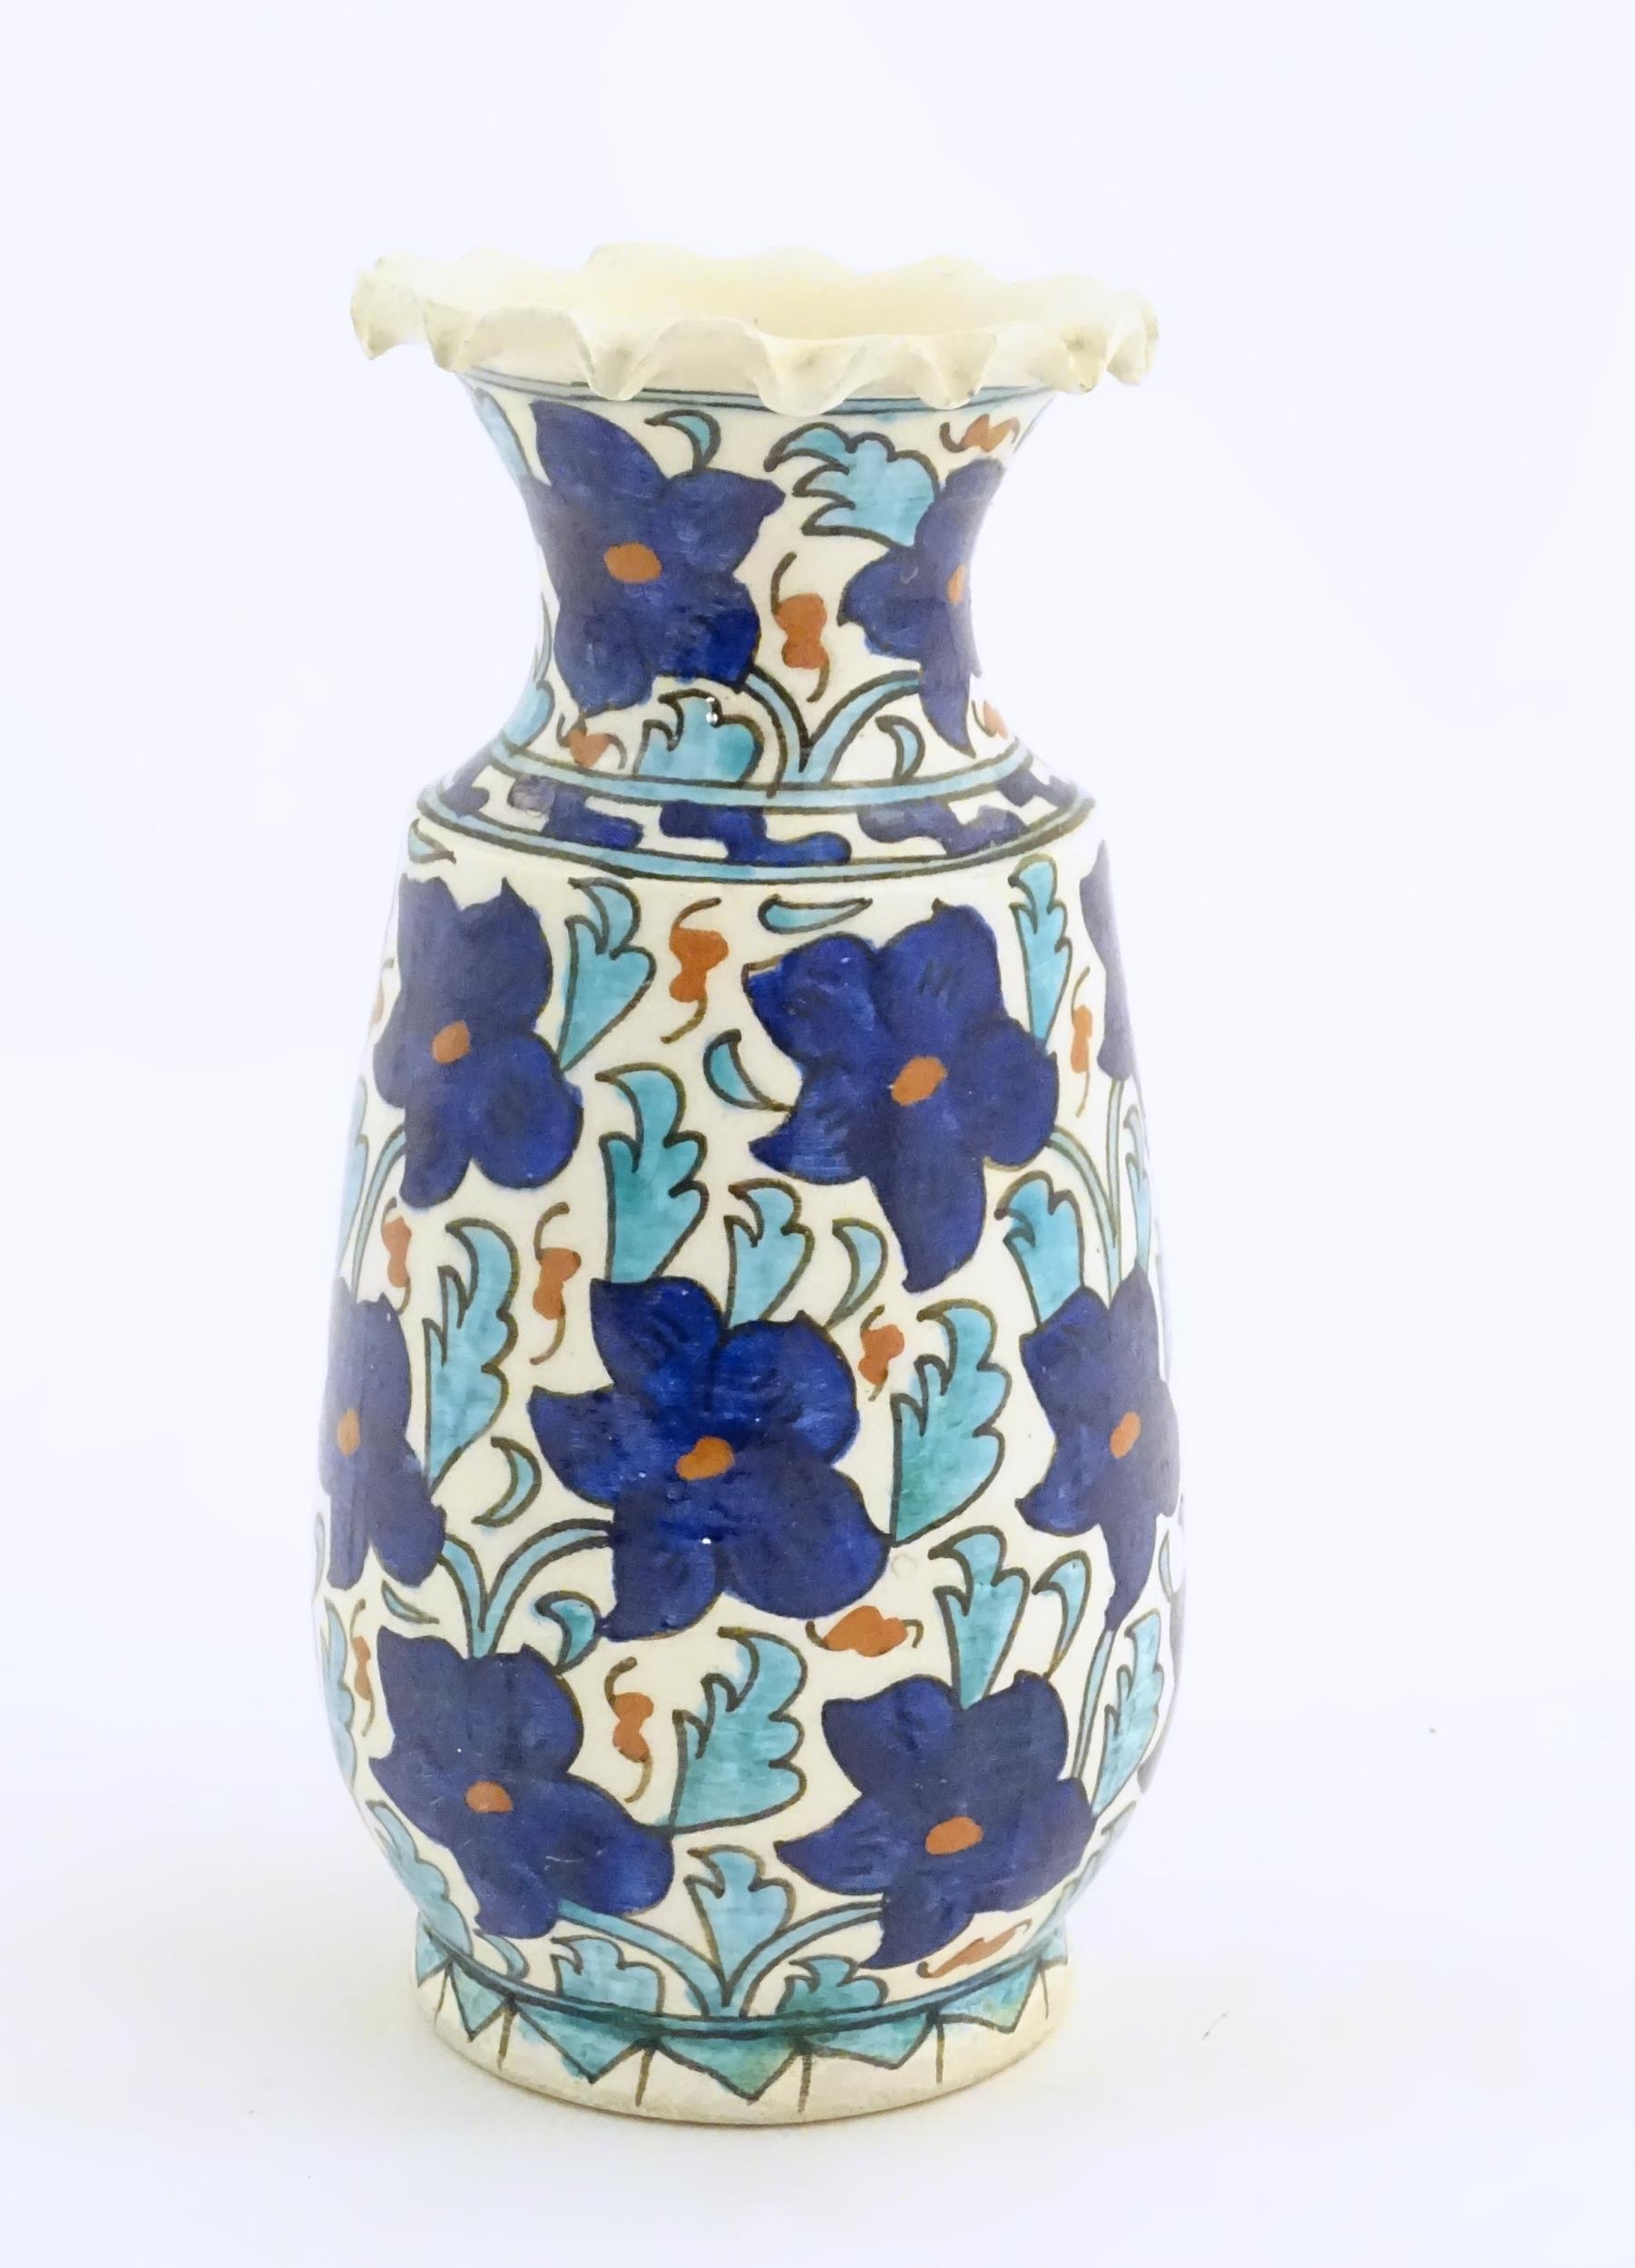 An Iznik style vase with blue, white and red floral and foliate detail. Approx. 7 3/4" high Please